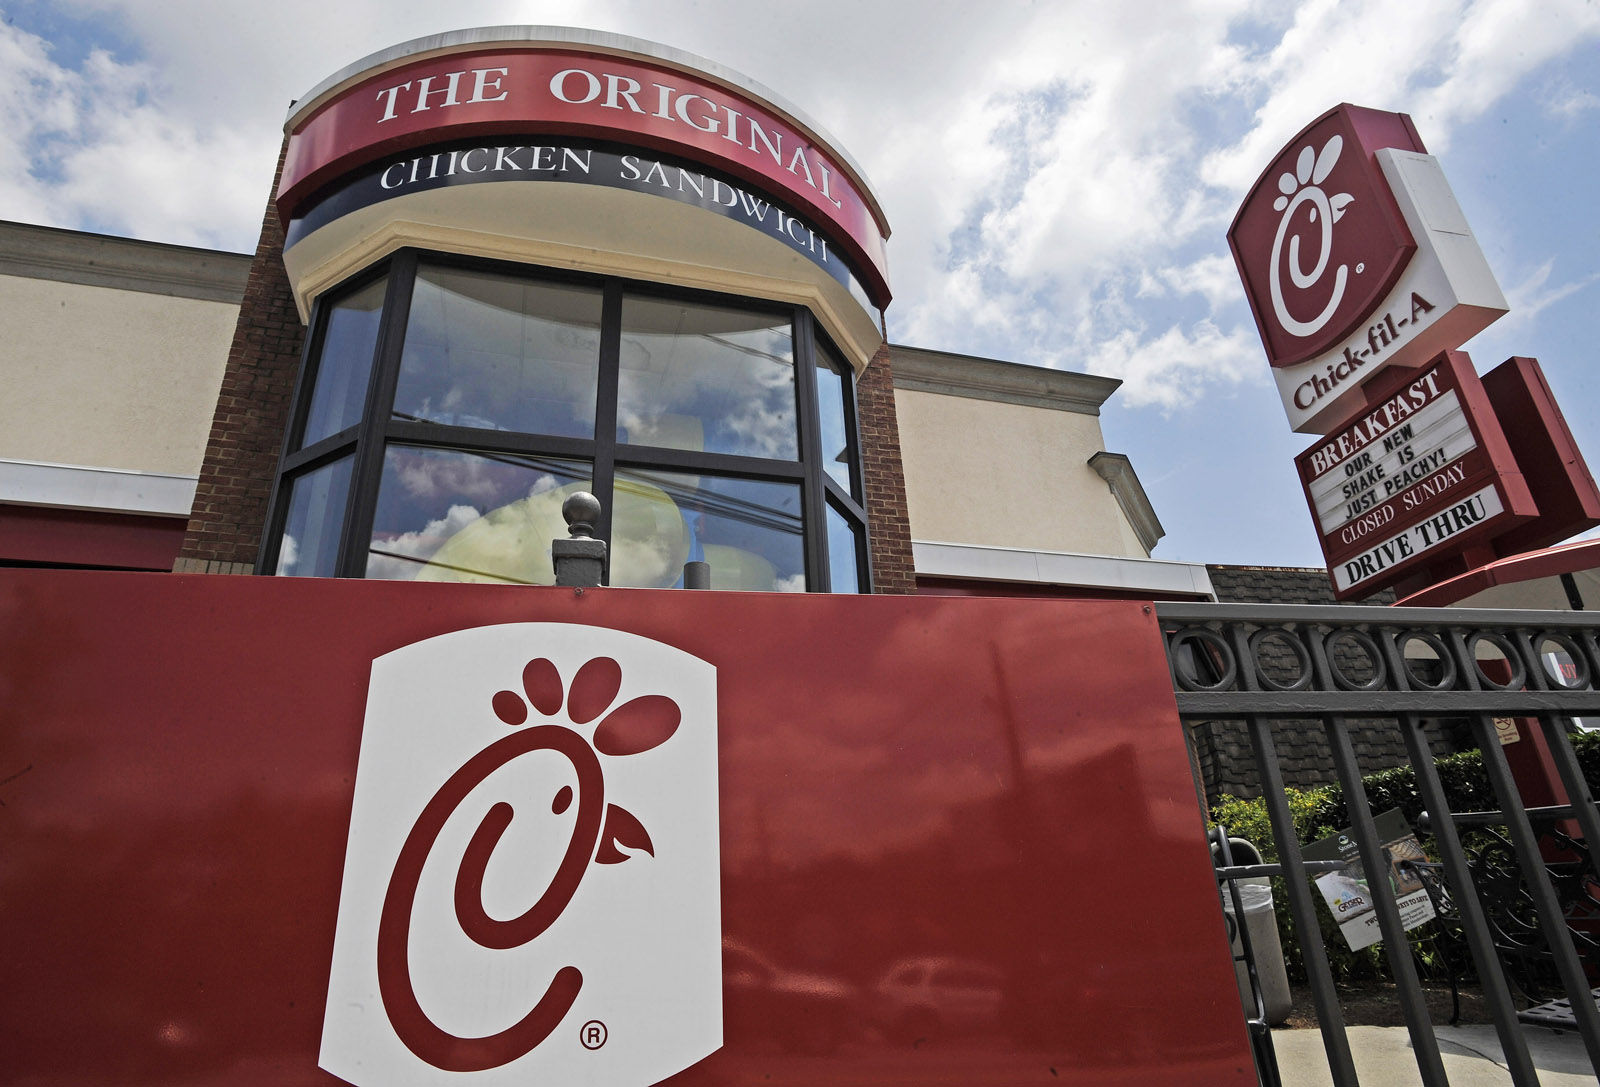 FILE - This Thursday, July 19, 2012 file photo shows a Chick-fil-A fast food restaurant in Atlanta. Earlier this month, Chick-fil-A set off a furor opposing same-sex unions. Other companies are brushing off fears that support for gay marriage could hurt their bottom line. (AP Photo/Mike Stewart, File)